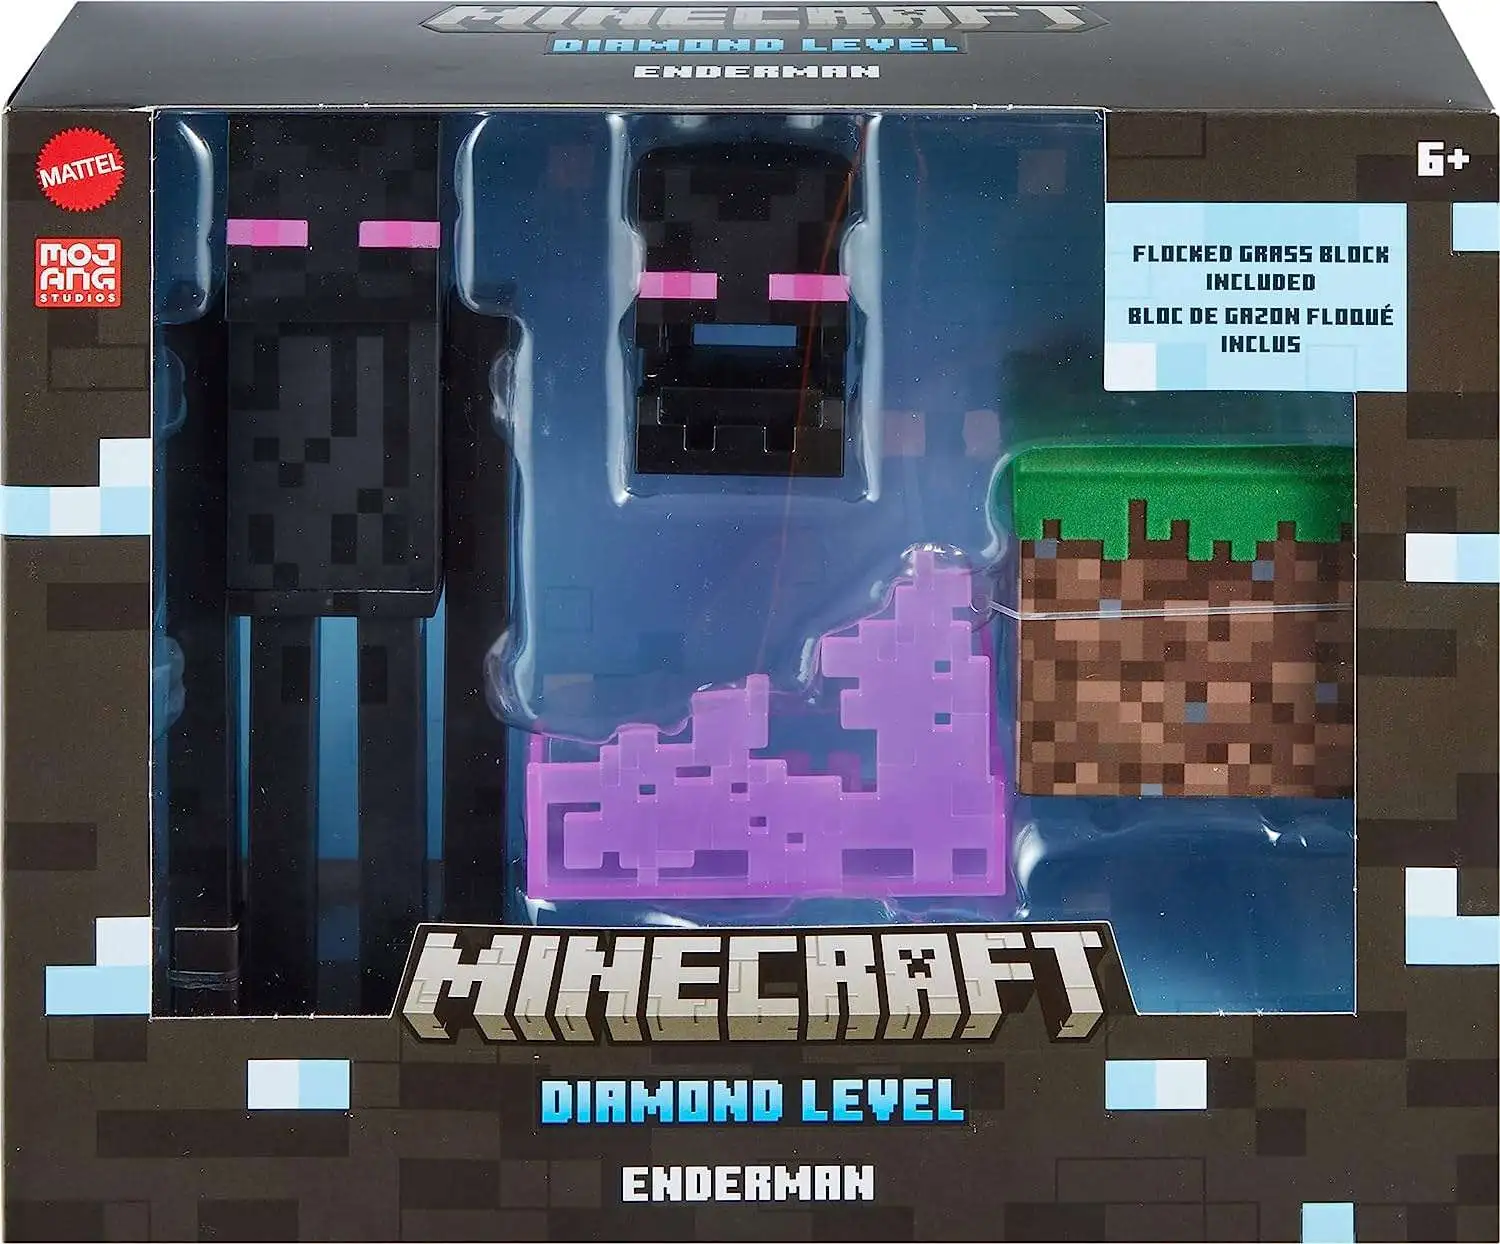 Minecraft Survival Mode Blaze with Spinning Action 5-Inch Figure